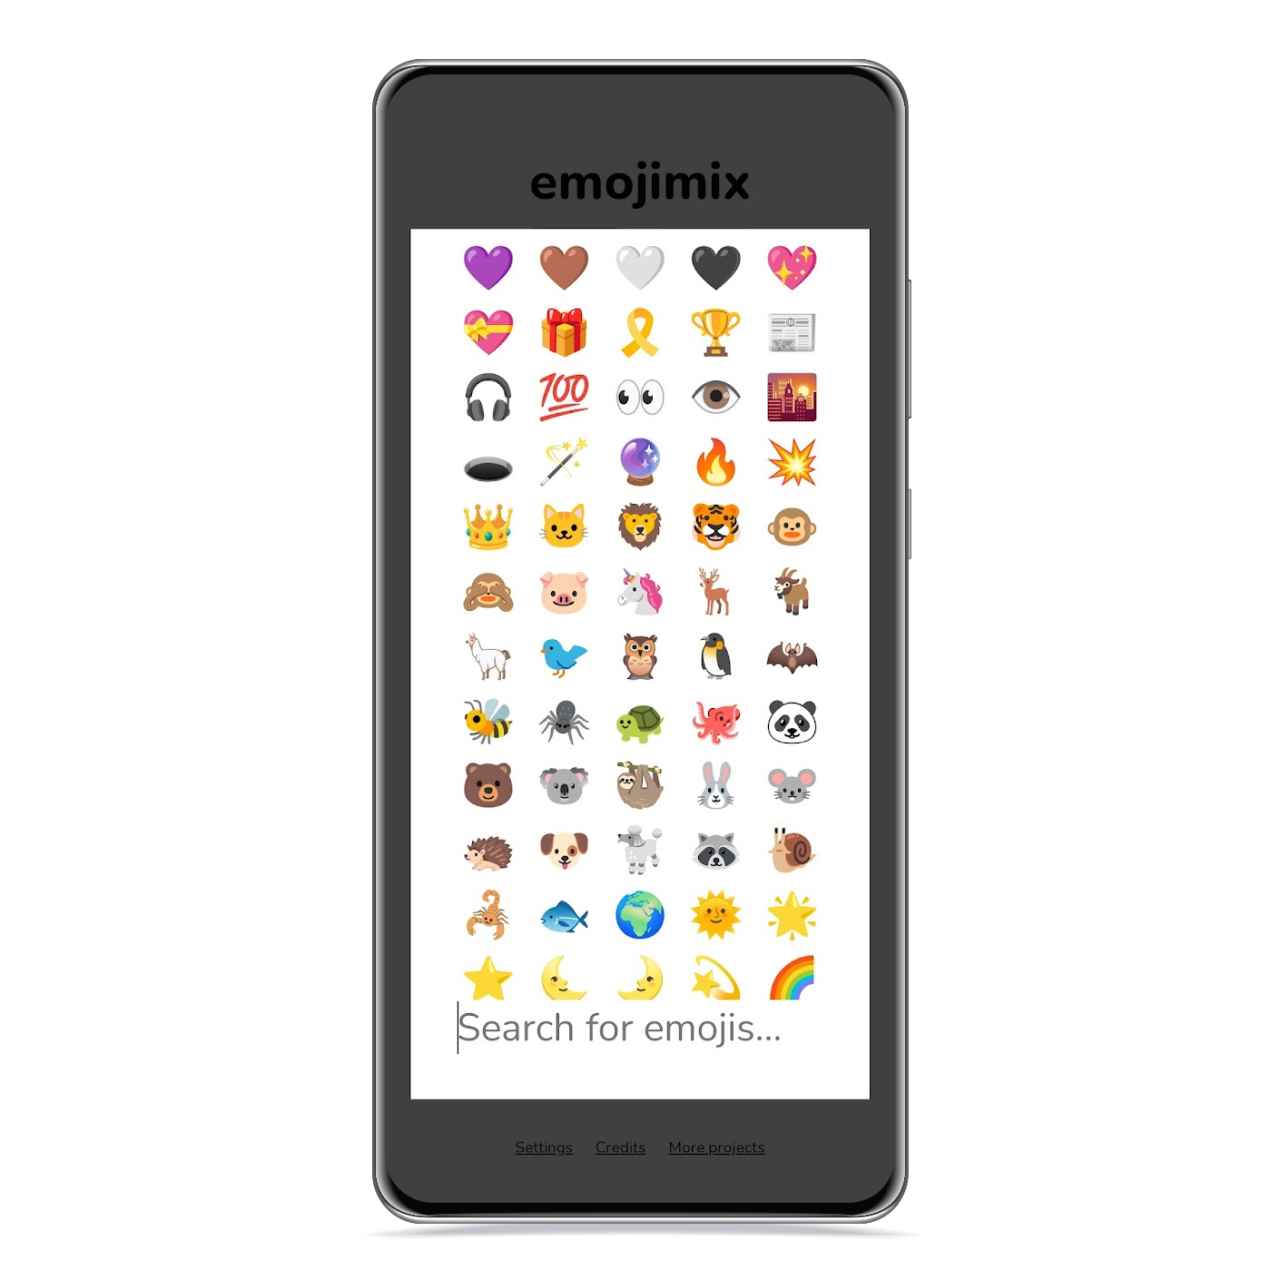 All emojis available